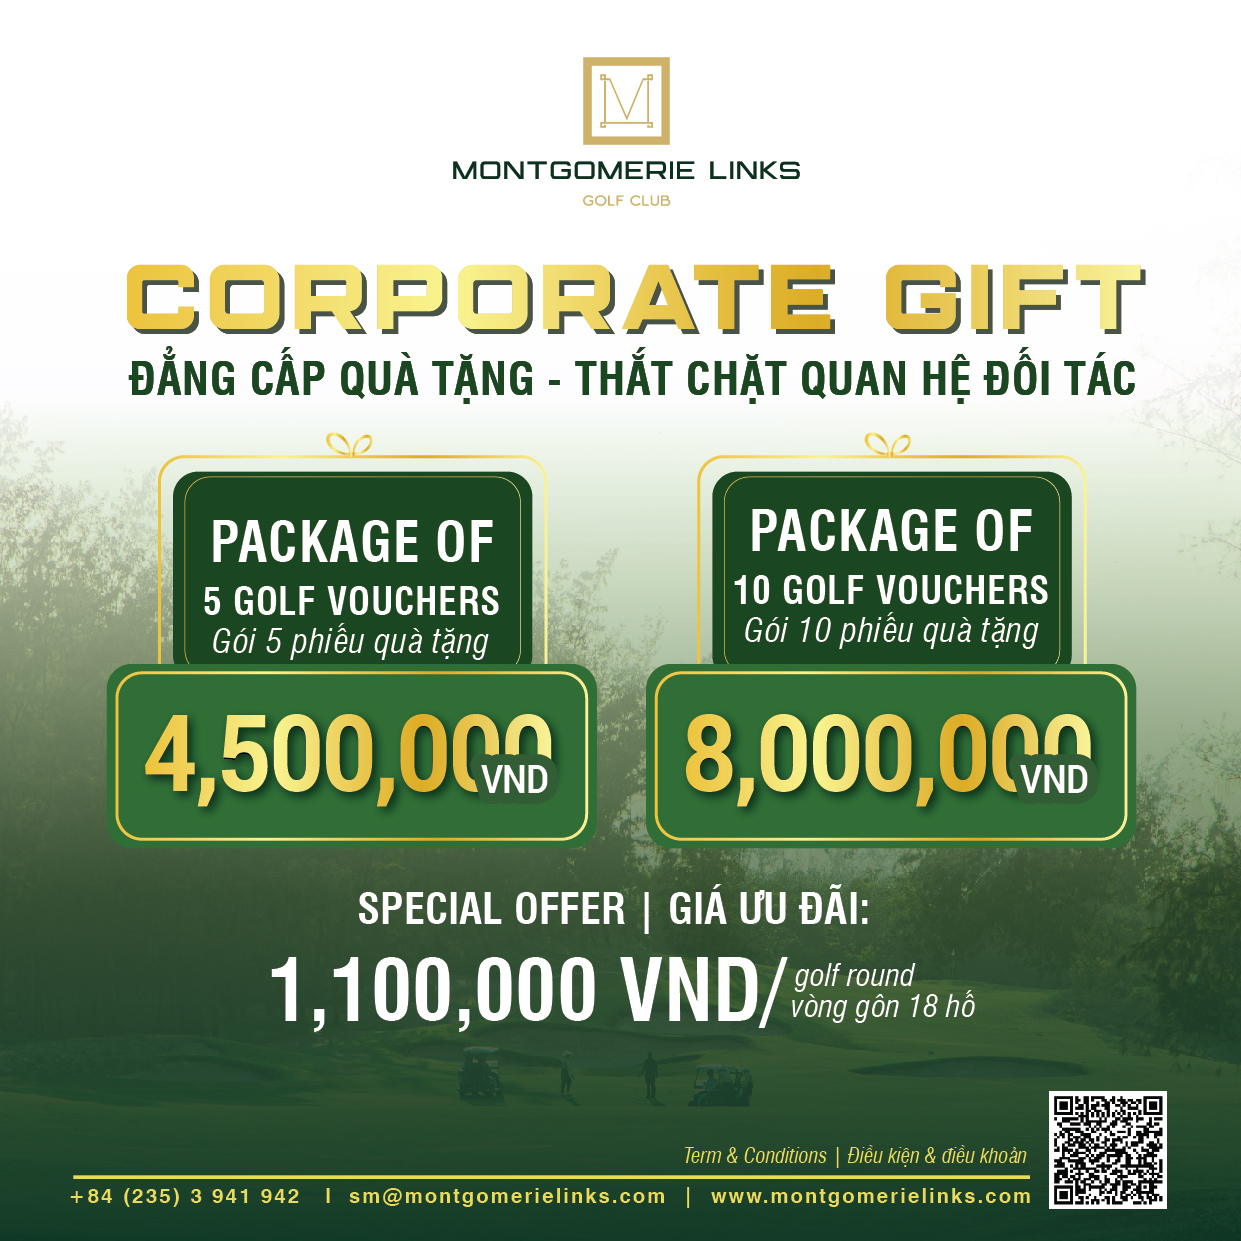 CORPORATE GIFT